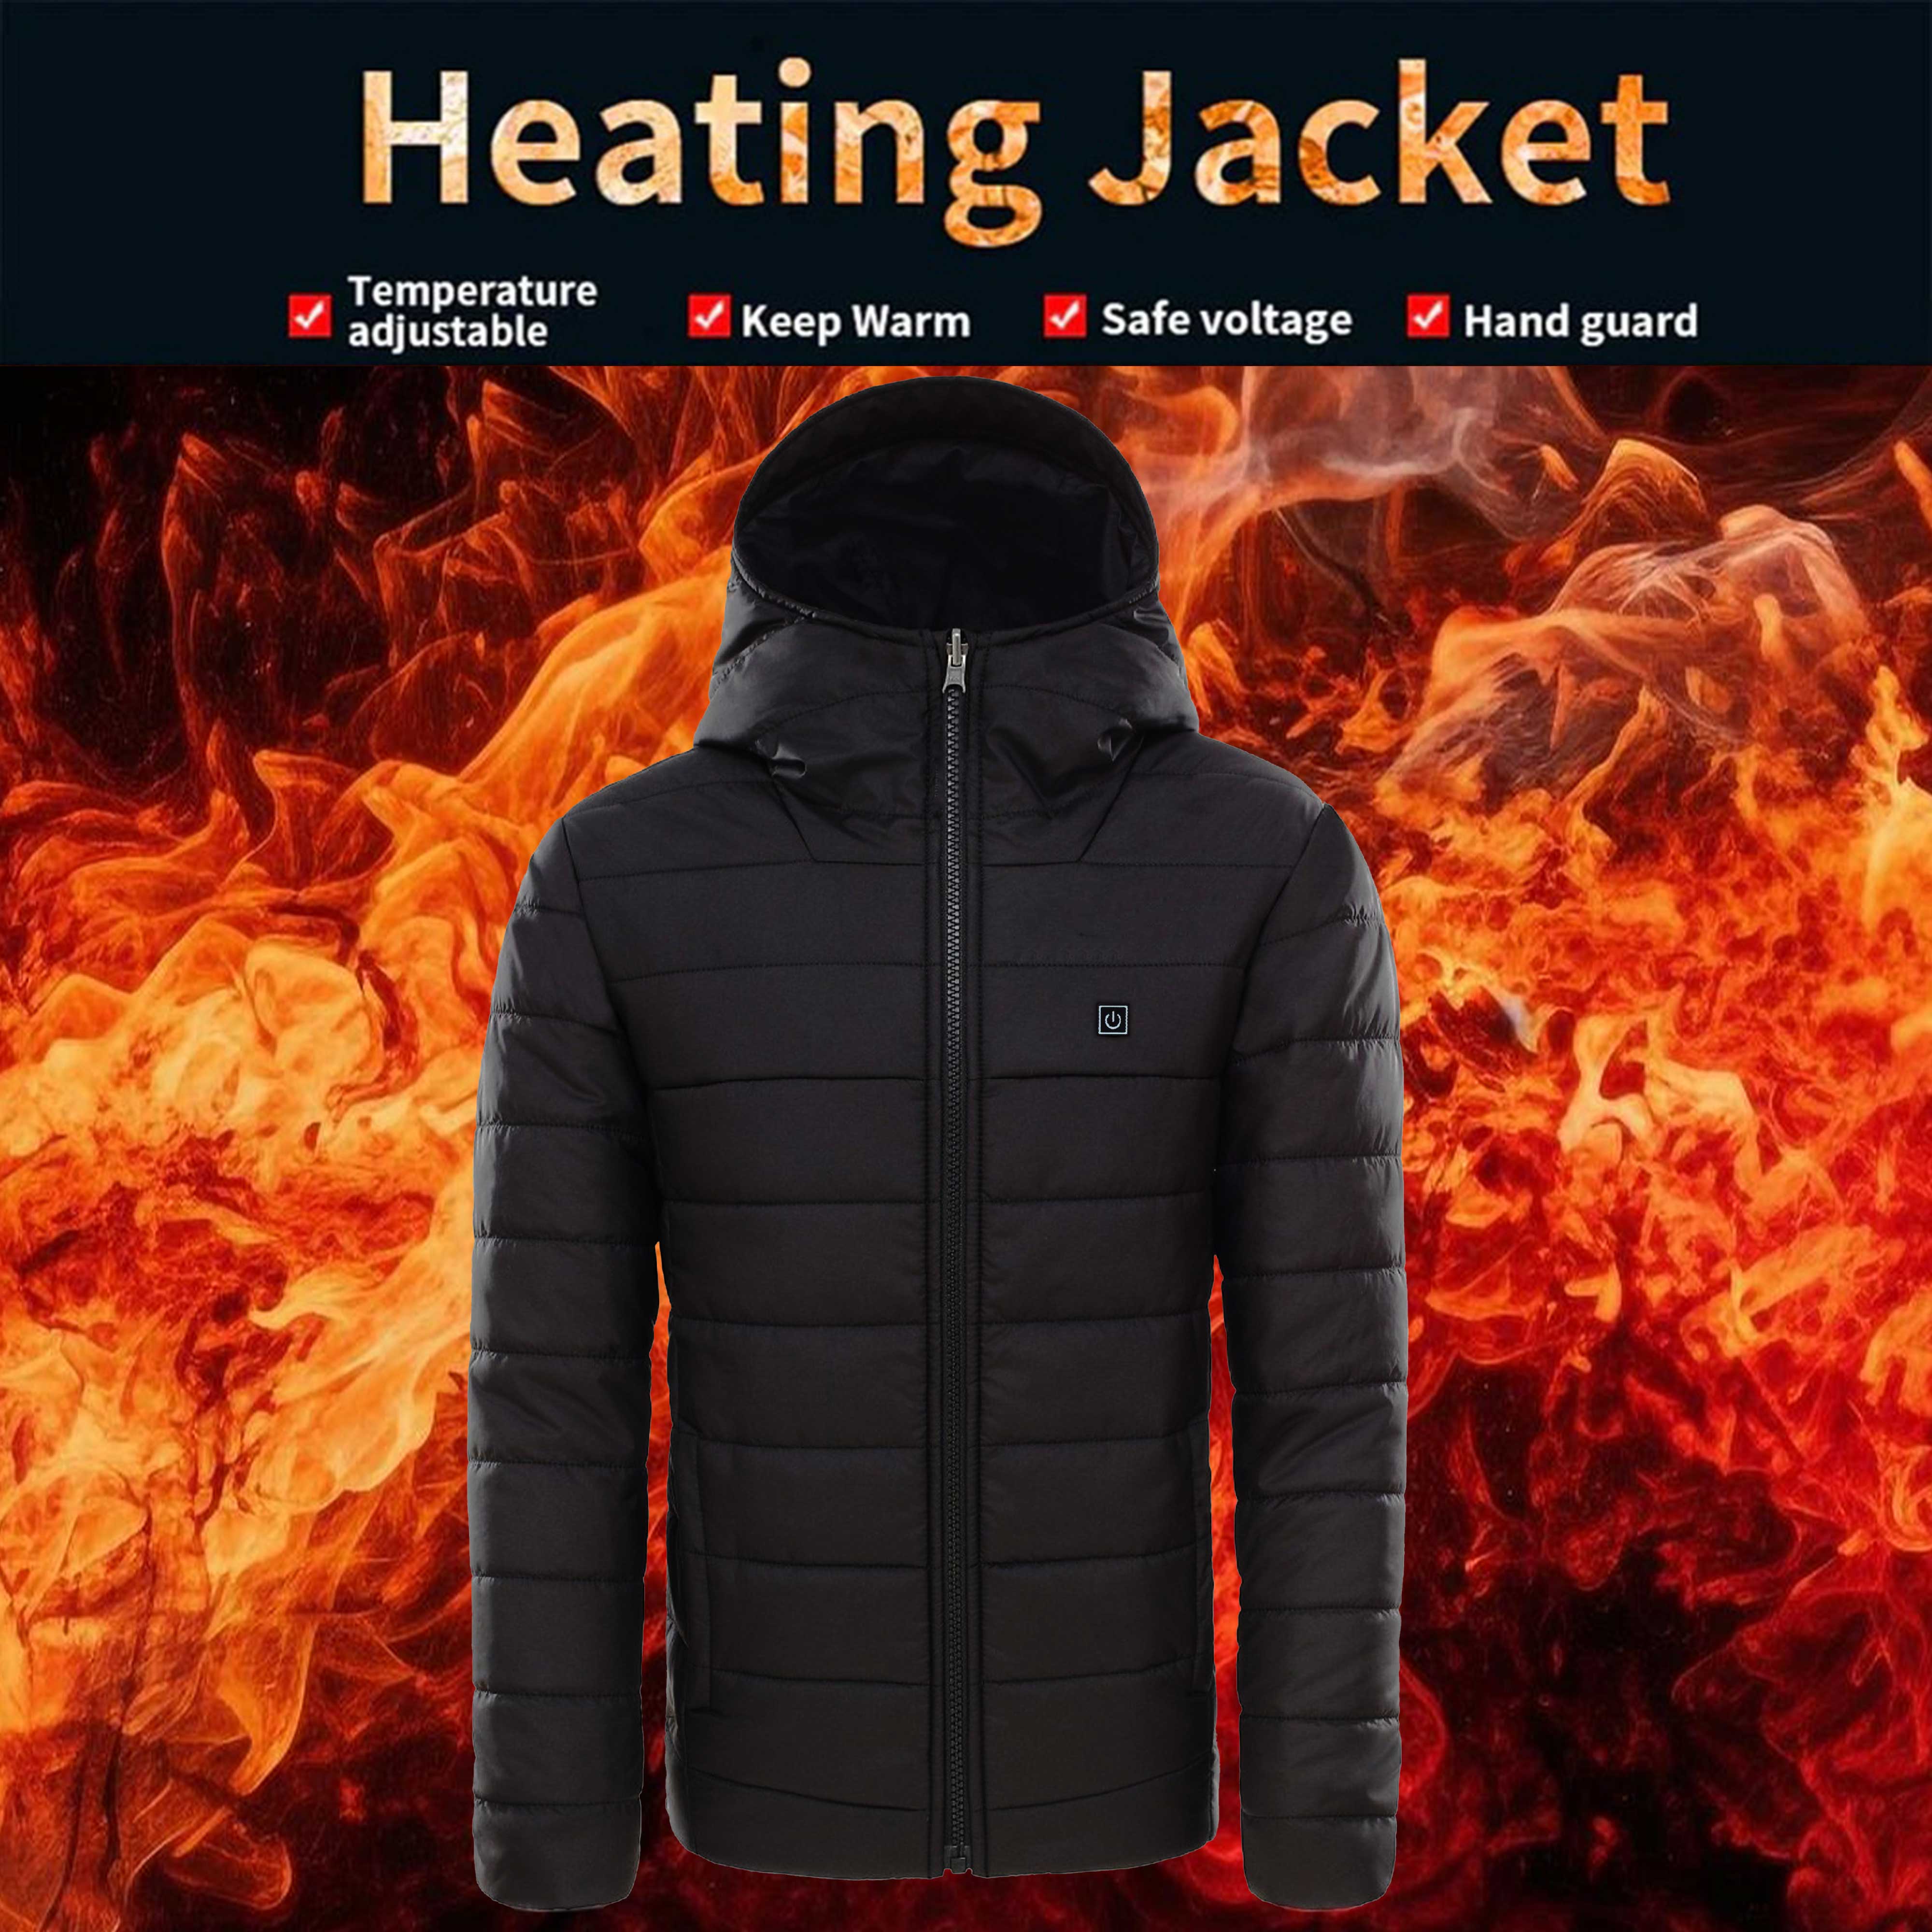 17 Areas Heated Jacket Usb Electric Heating Jacket Smart Thermostat Hooded  Heated Clothing Waterproof Winter Warm Padded Coat